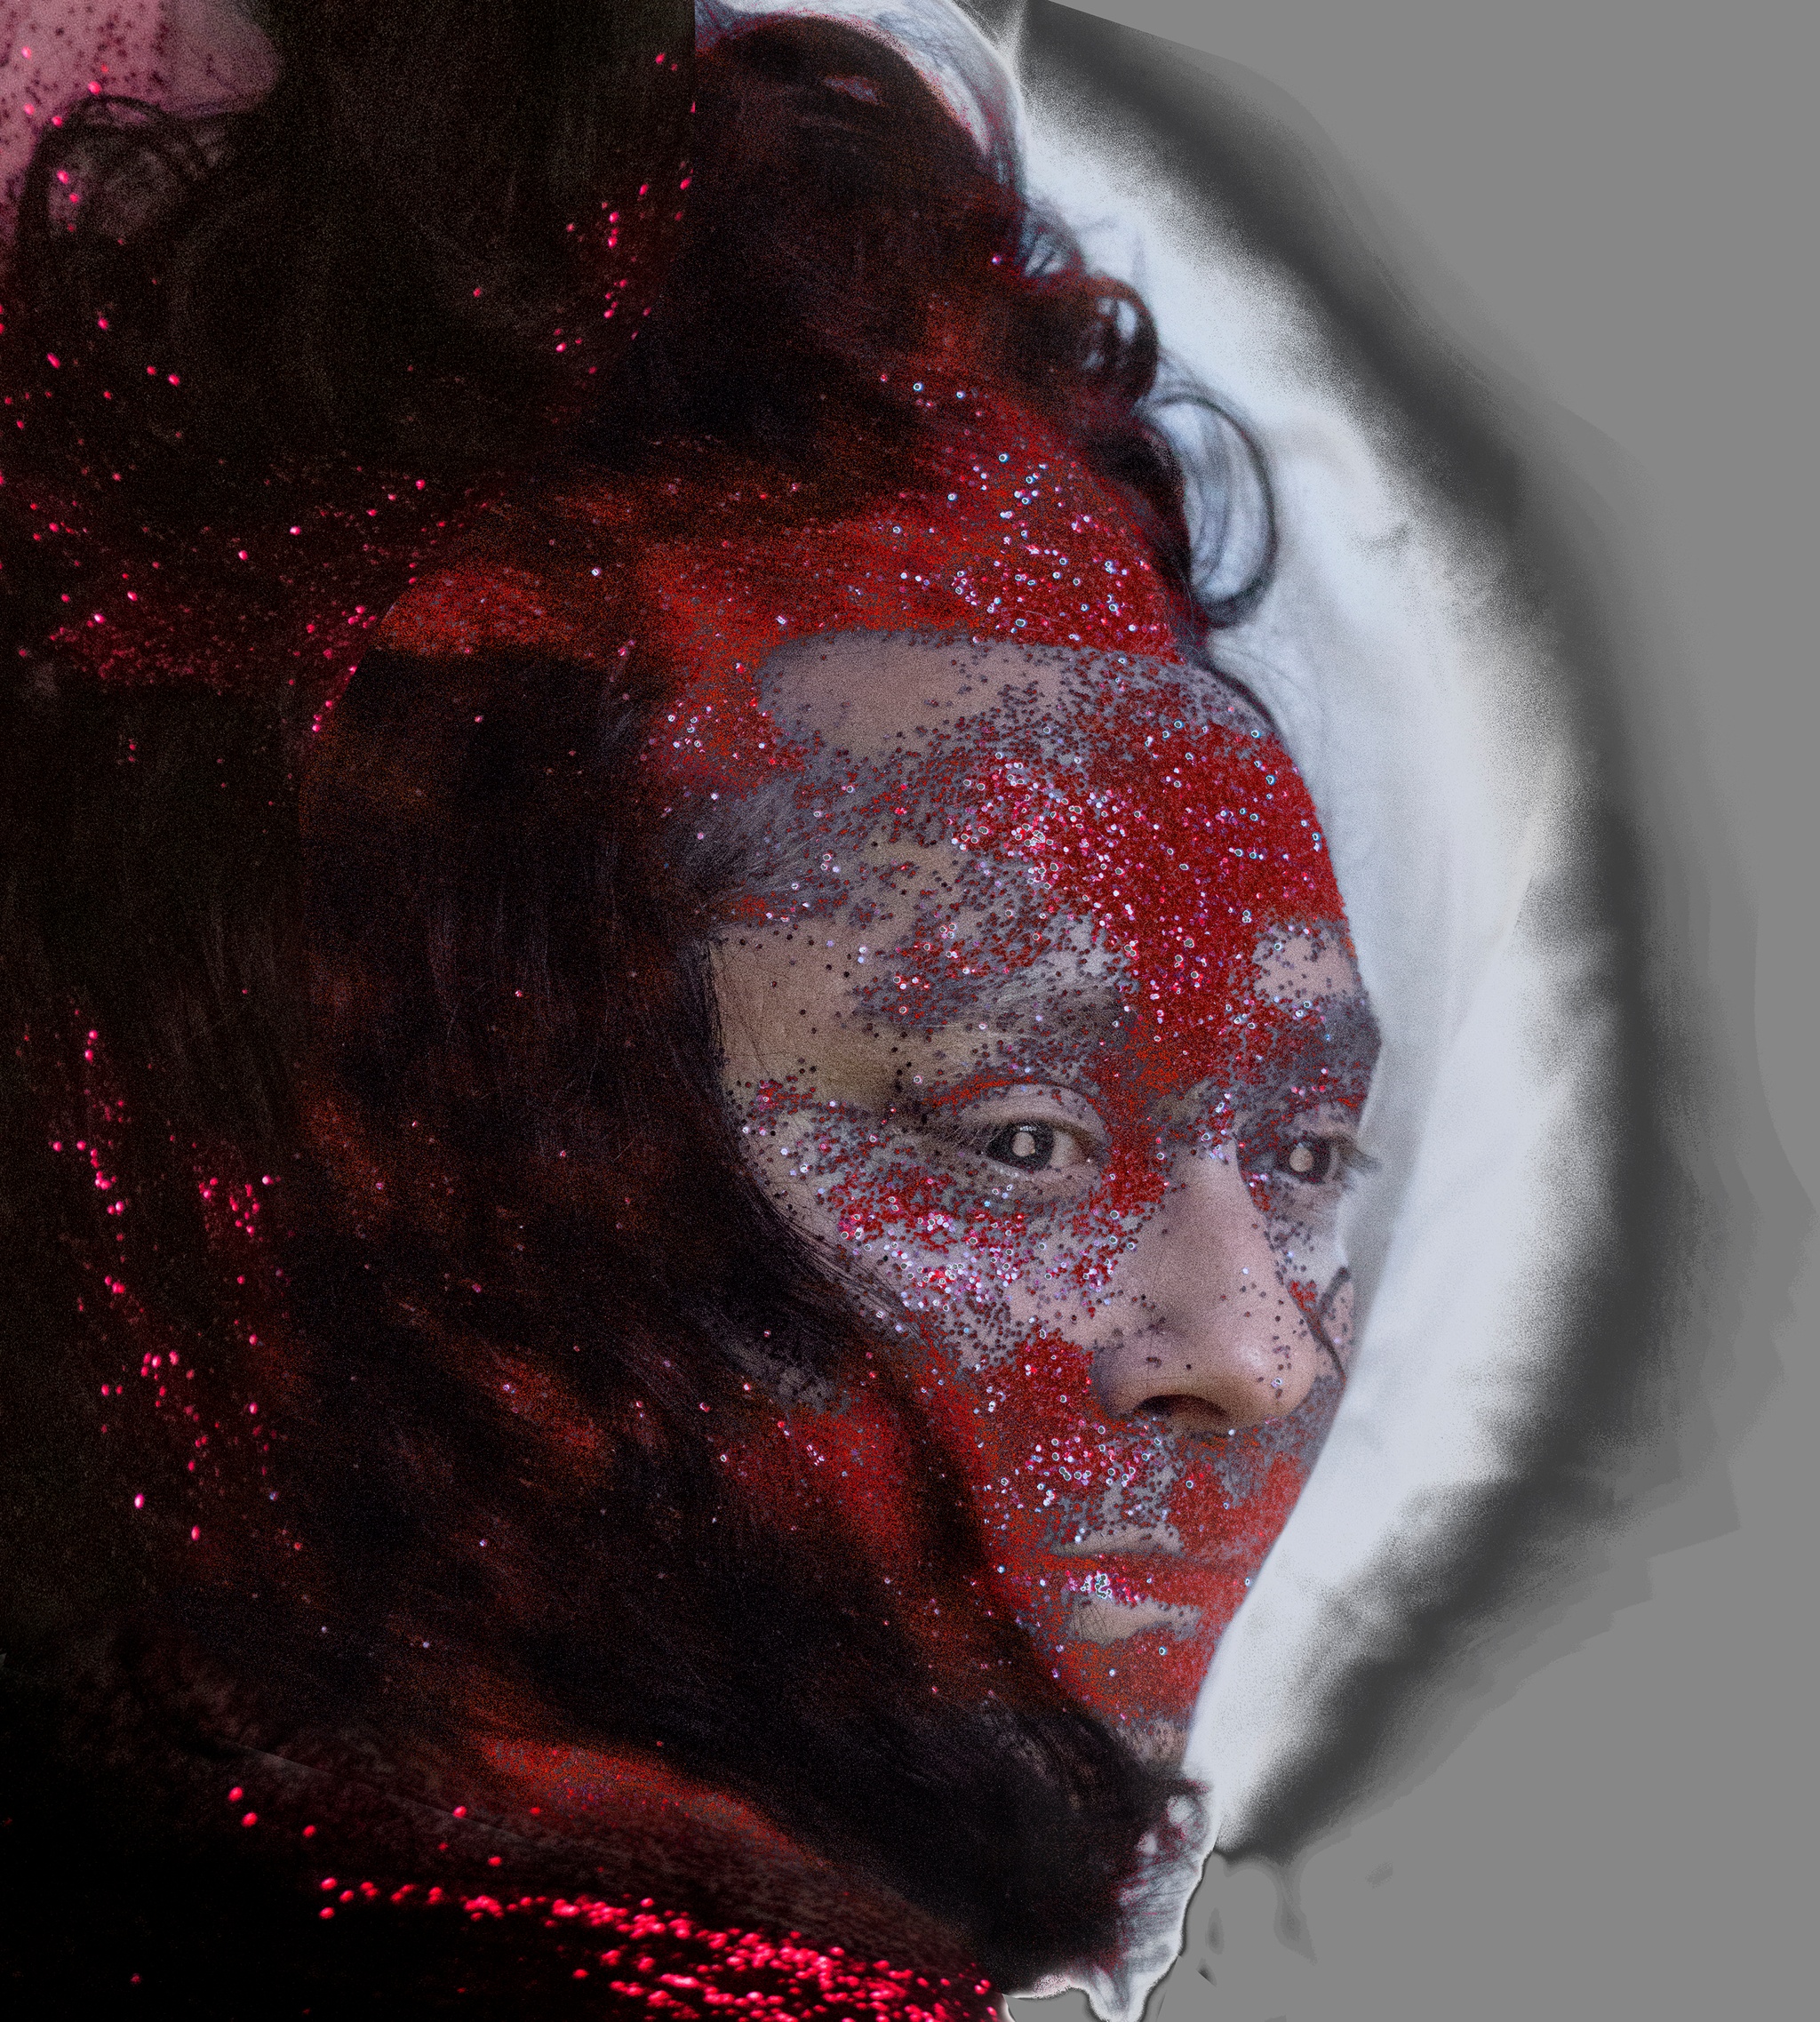 A close-up portrait of the artist ANOHNI with red glitter spread over her face and hair. She looks out to the left from her hair that falls over the side of her face. 